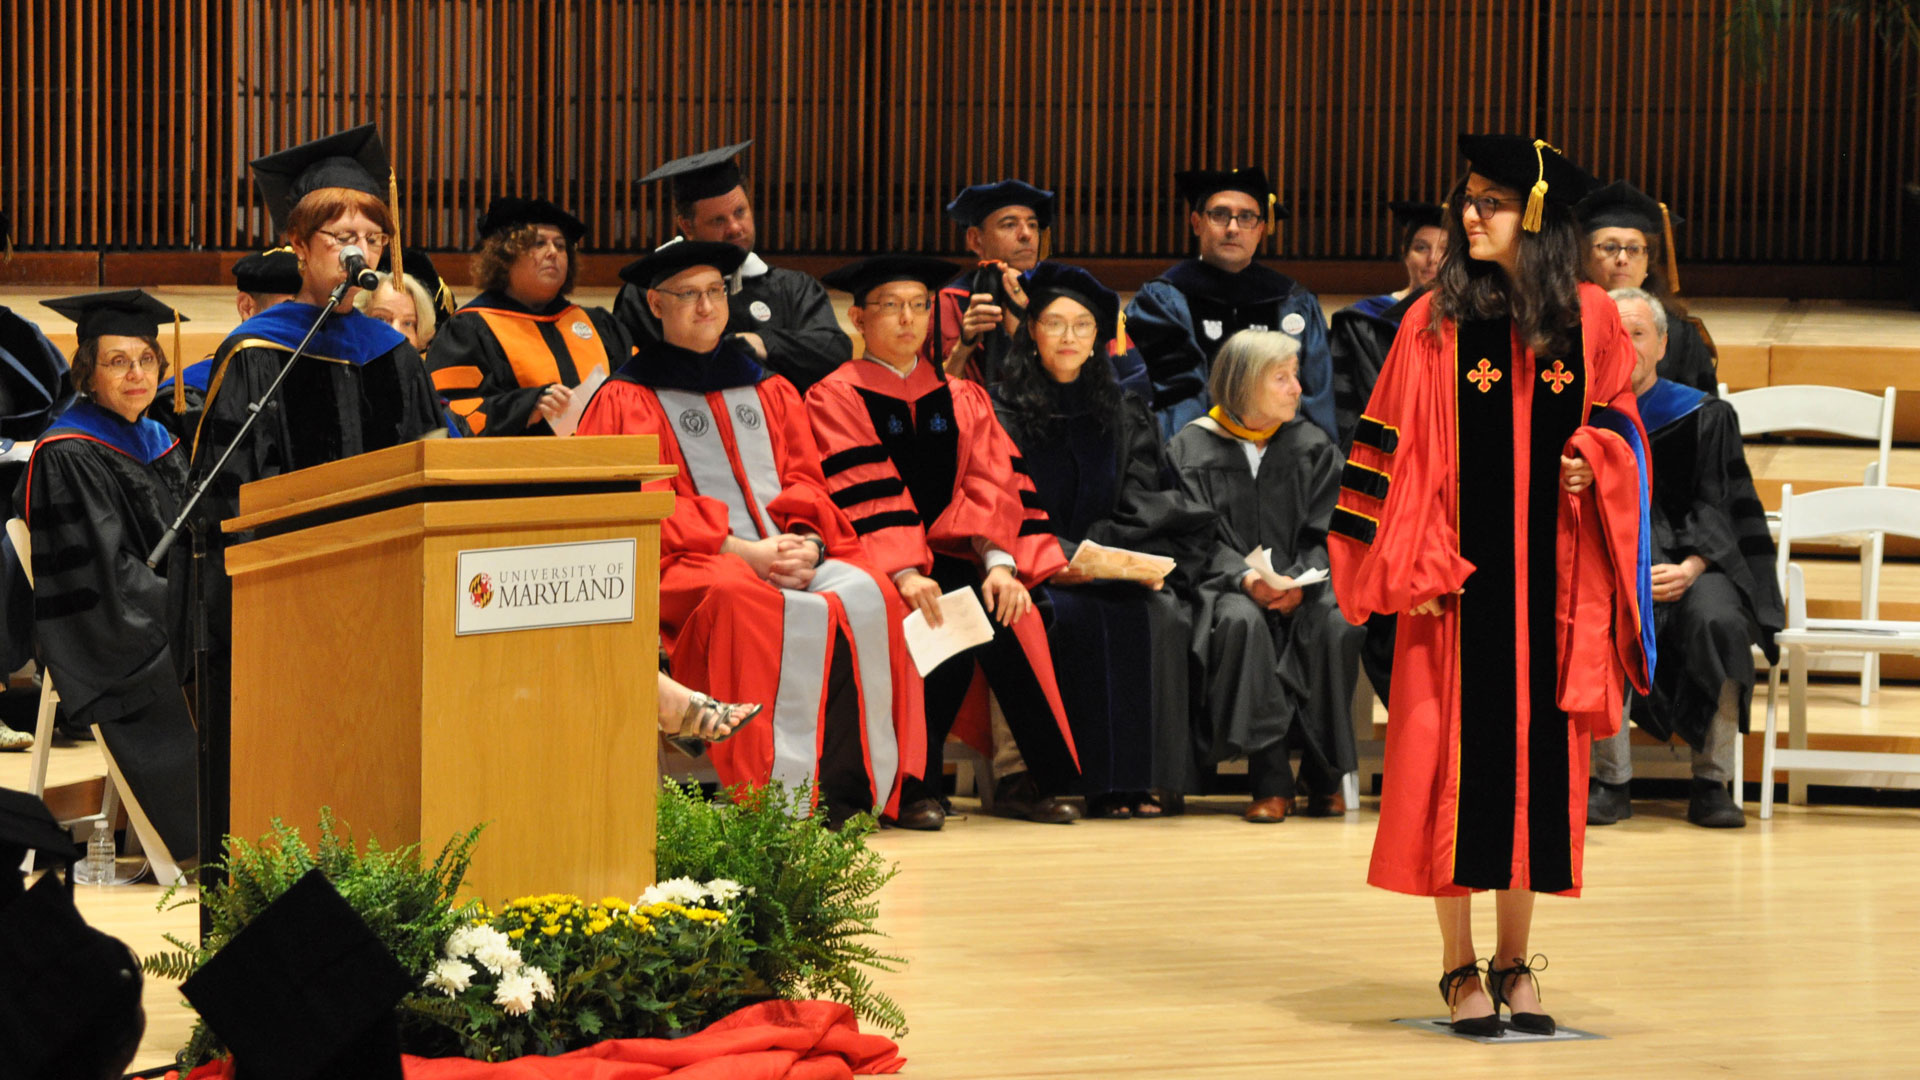 An SLLC graduate student stands on stage as they recieve their degree